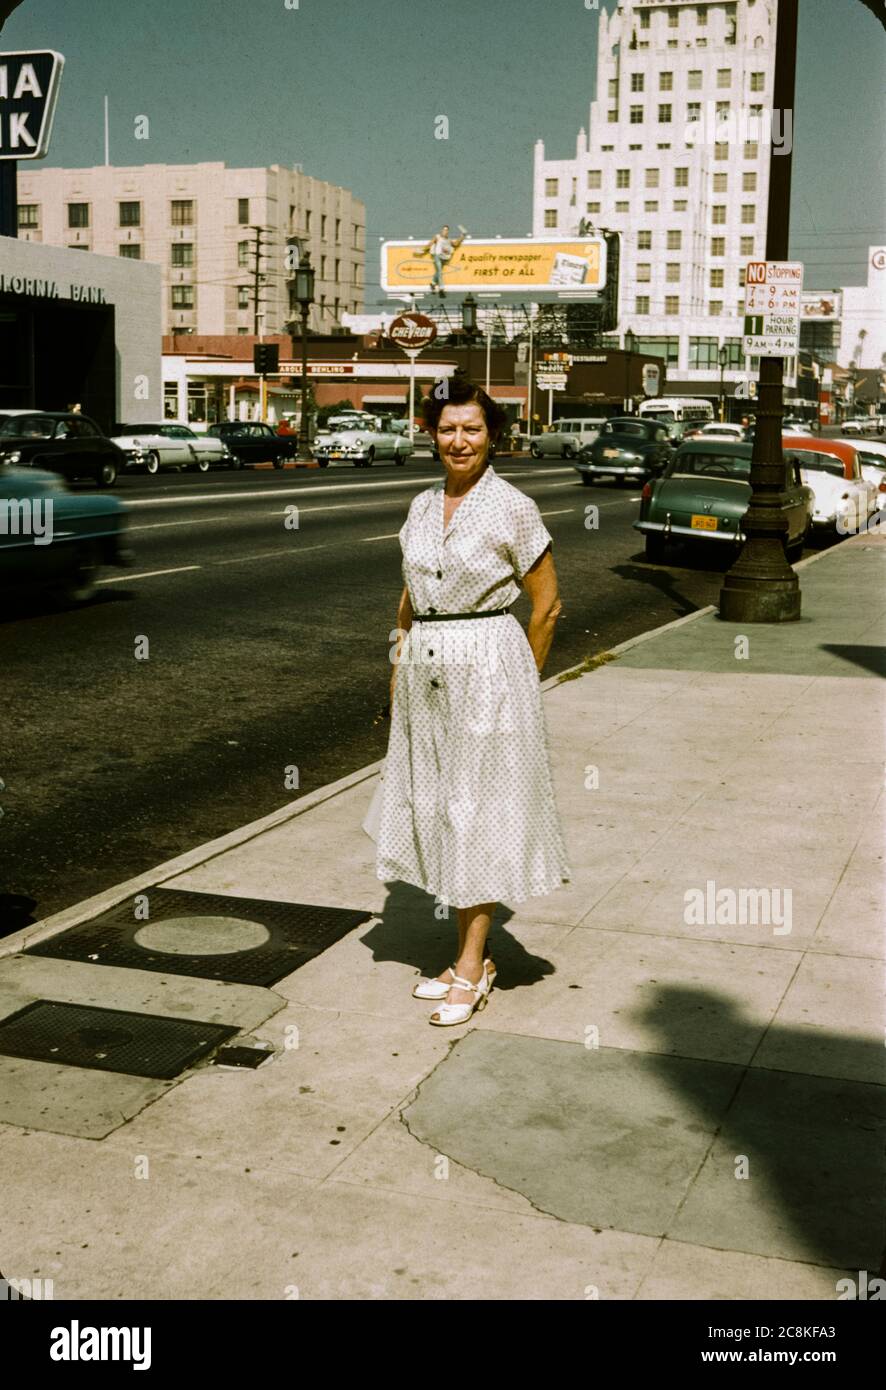 Woman standing on sidewalk in downtown Los Angeles, California in the 1950s. Billboards, and 50s cars are in the background including a billboard for the Los Angeles Times newspaper. Stock Photo